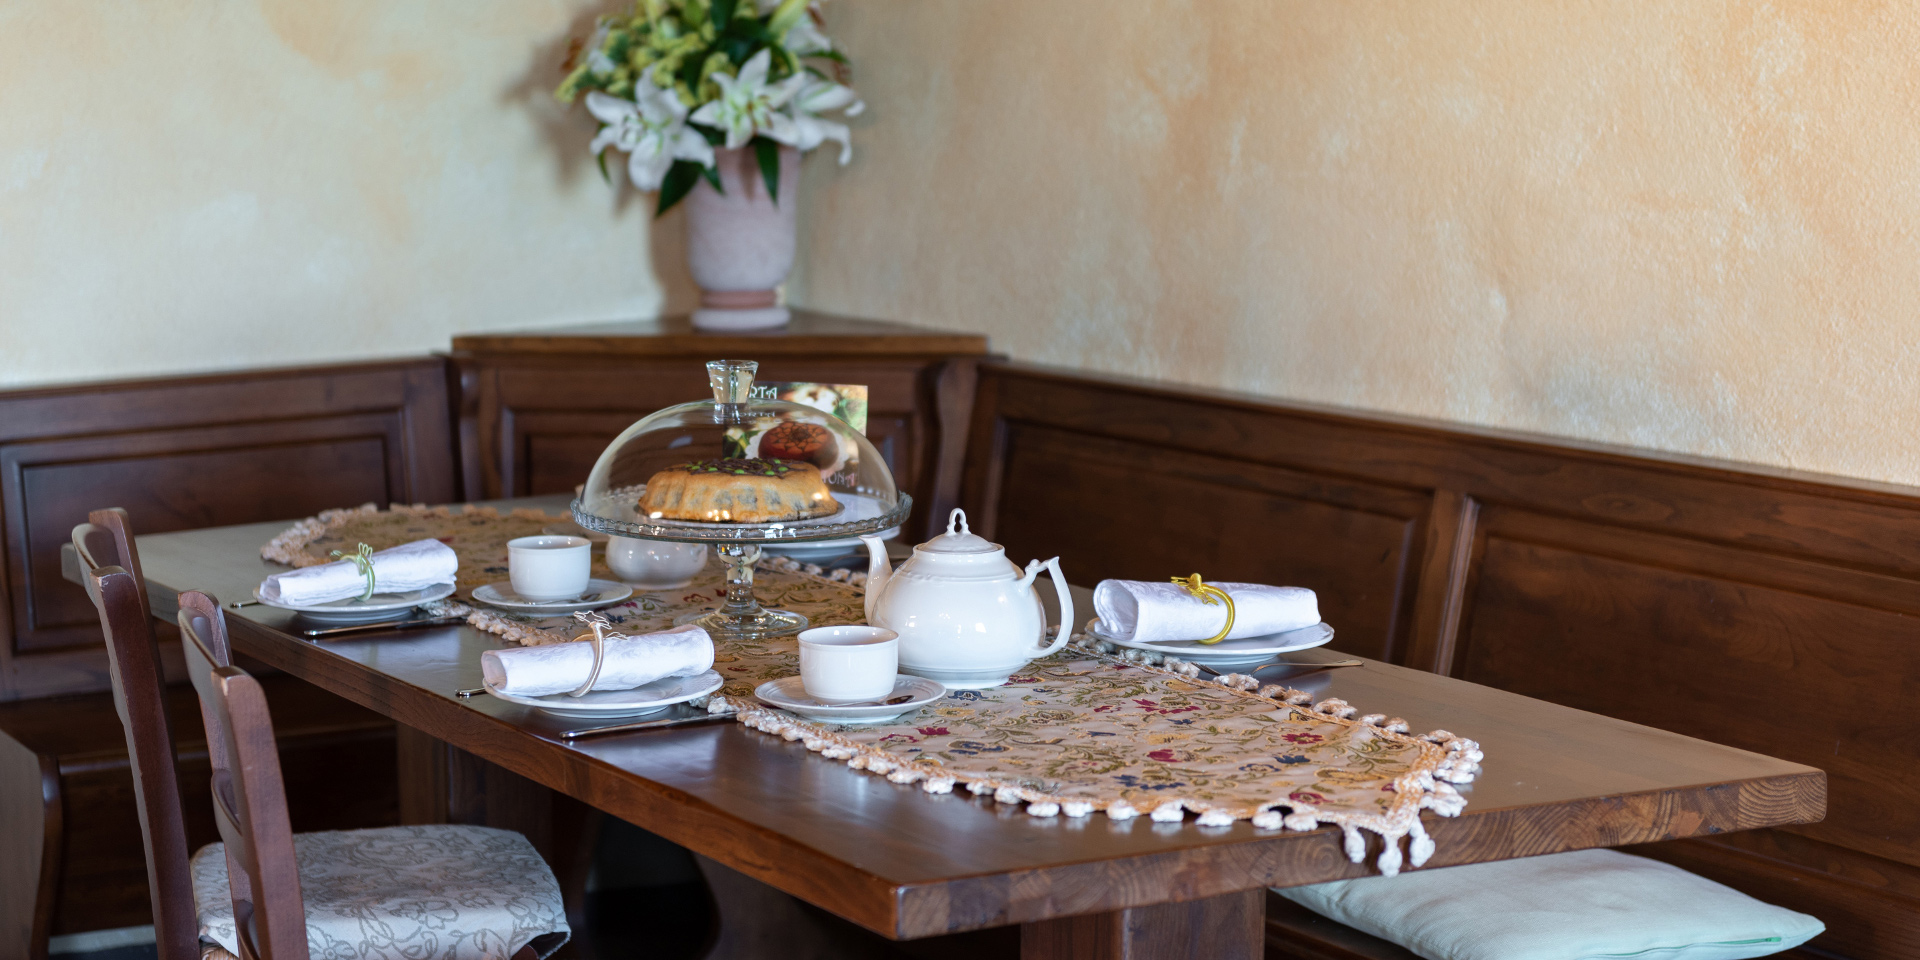 A set up table with elegance in Pisae Apartment, Monastero San Silvestro